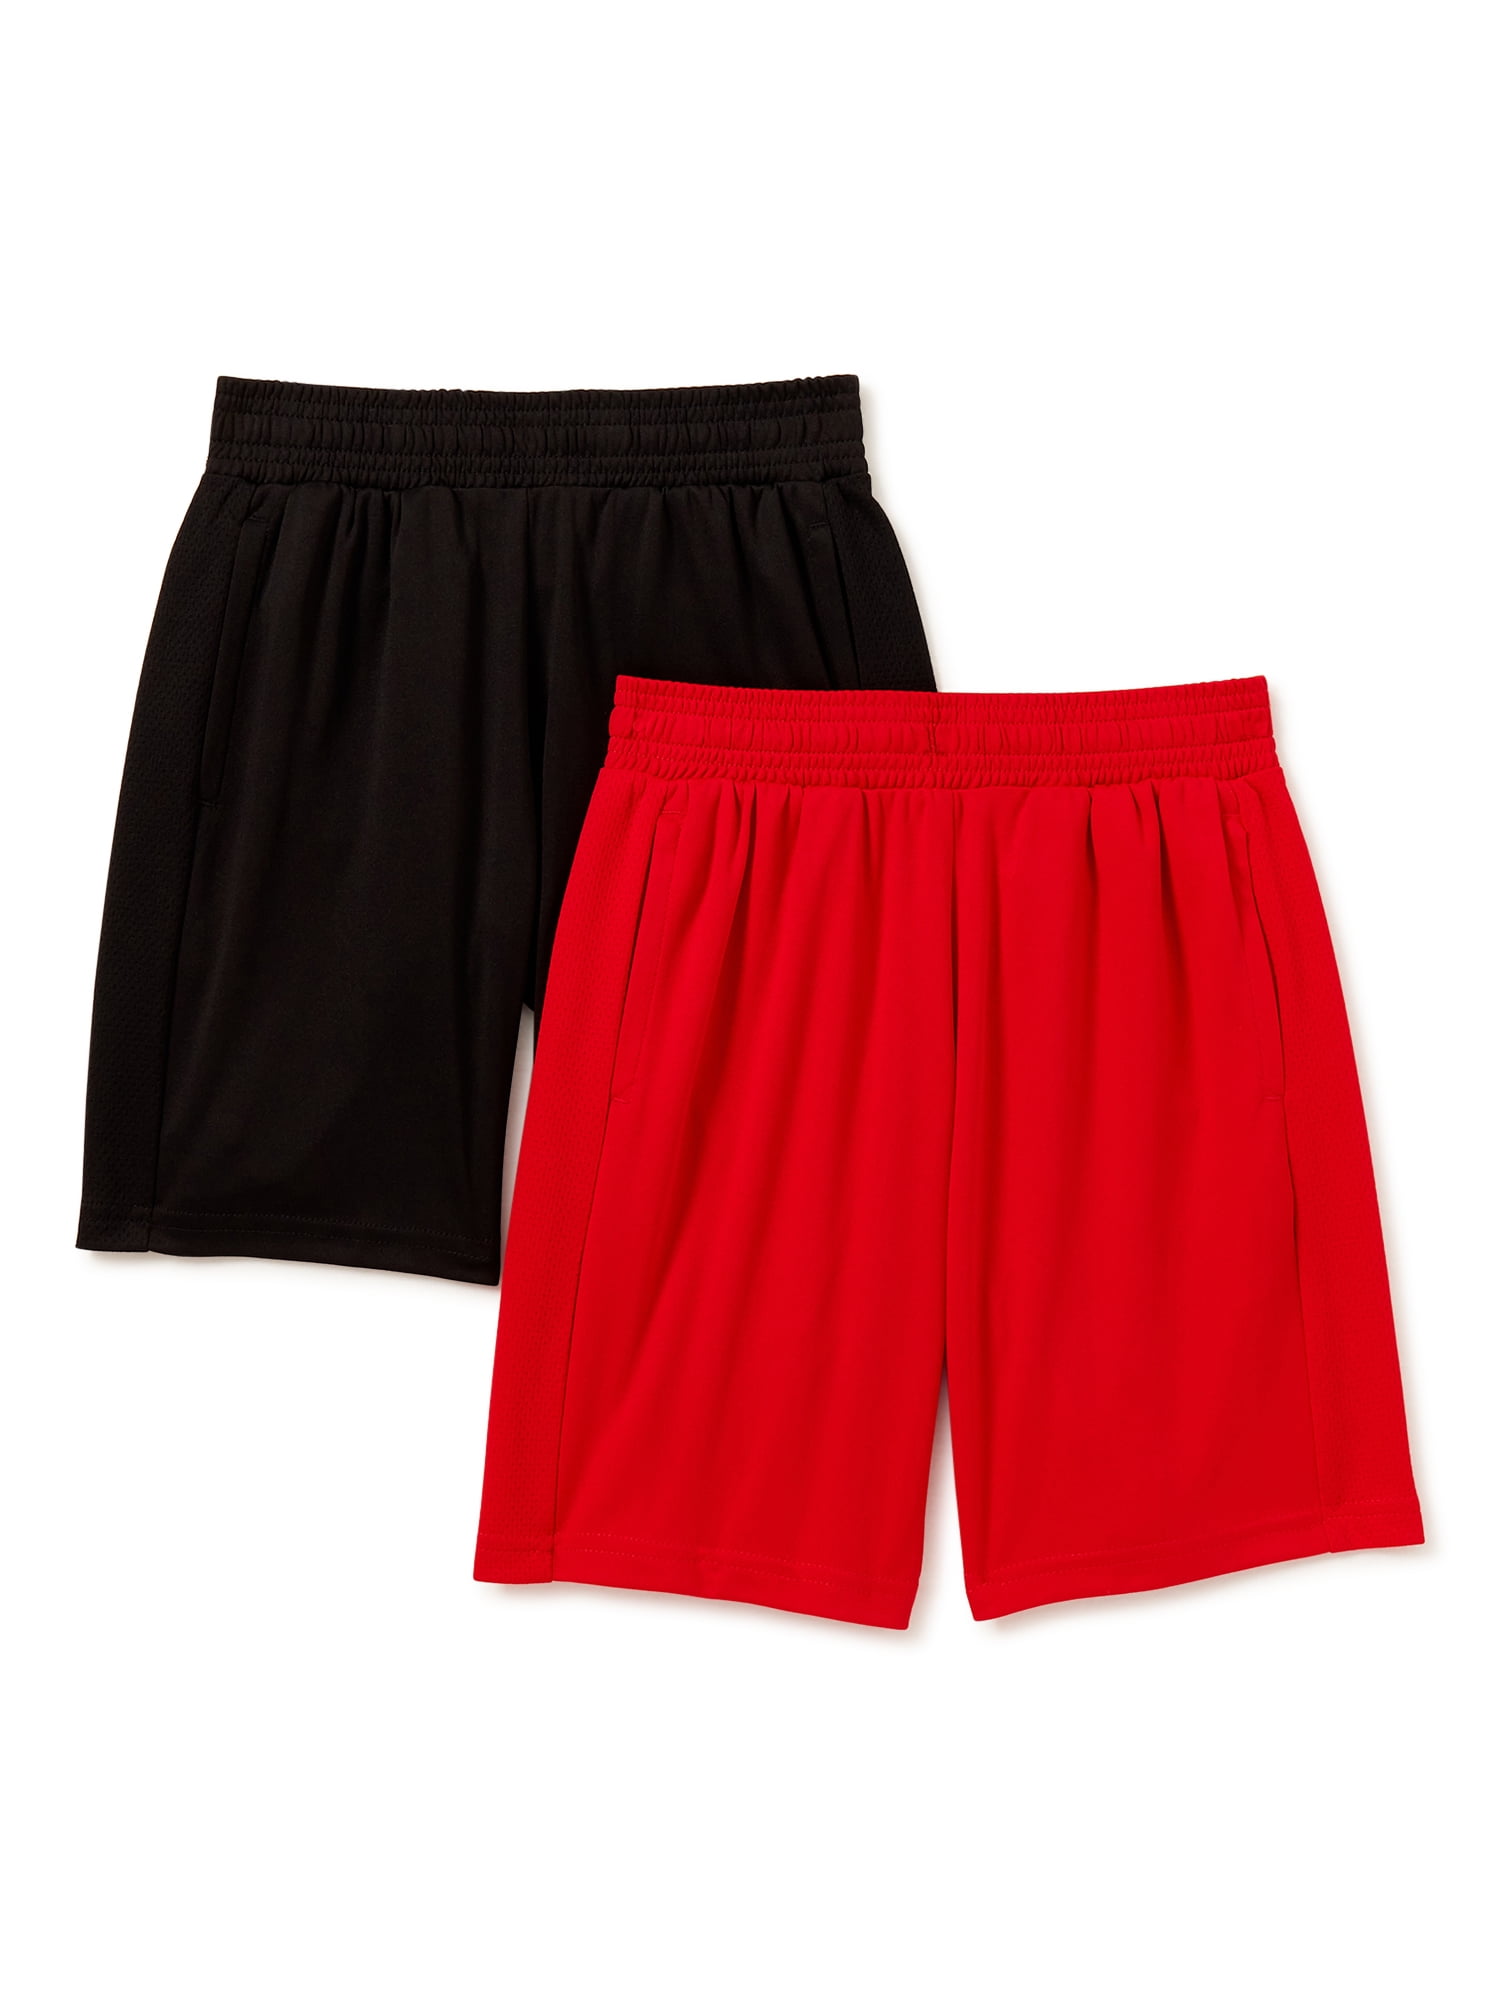 Old Navy Boys Go-Dry 2-in-1 Mesh Basketball Shorts ~ Black Size Small XL ~ $23